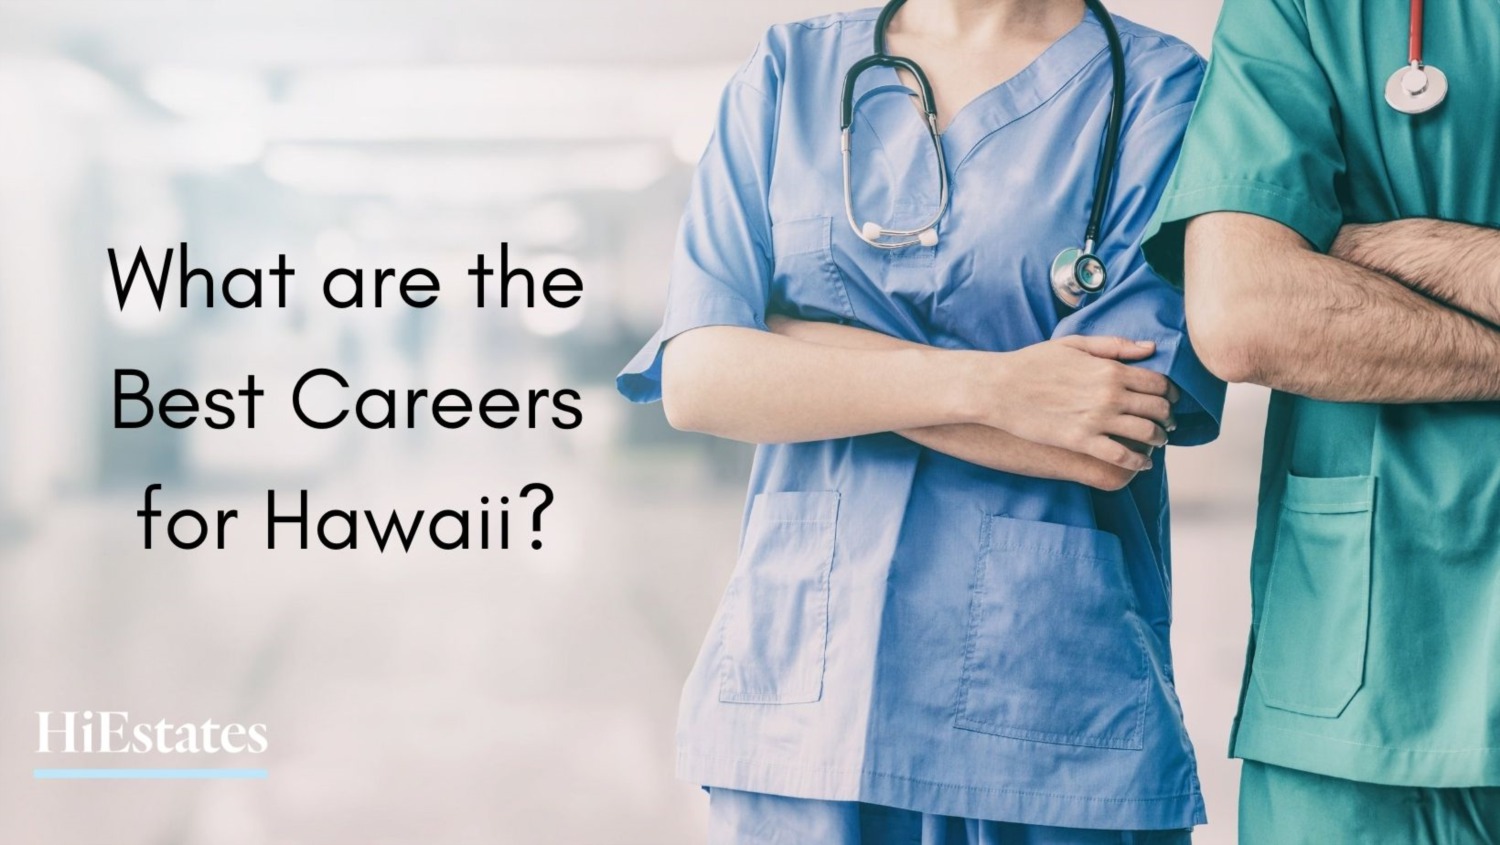 What are the Best Careers for Hawaii?